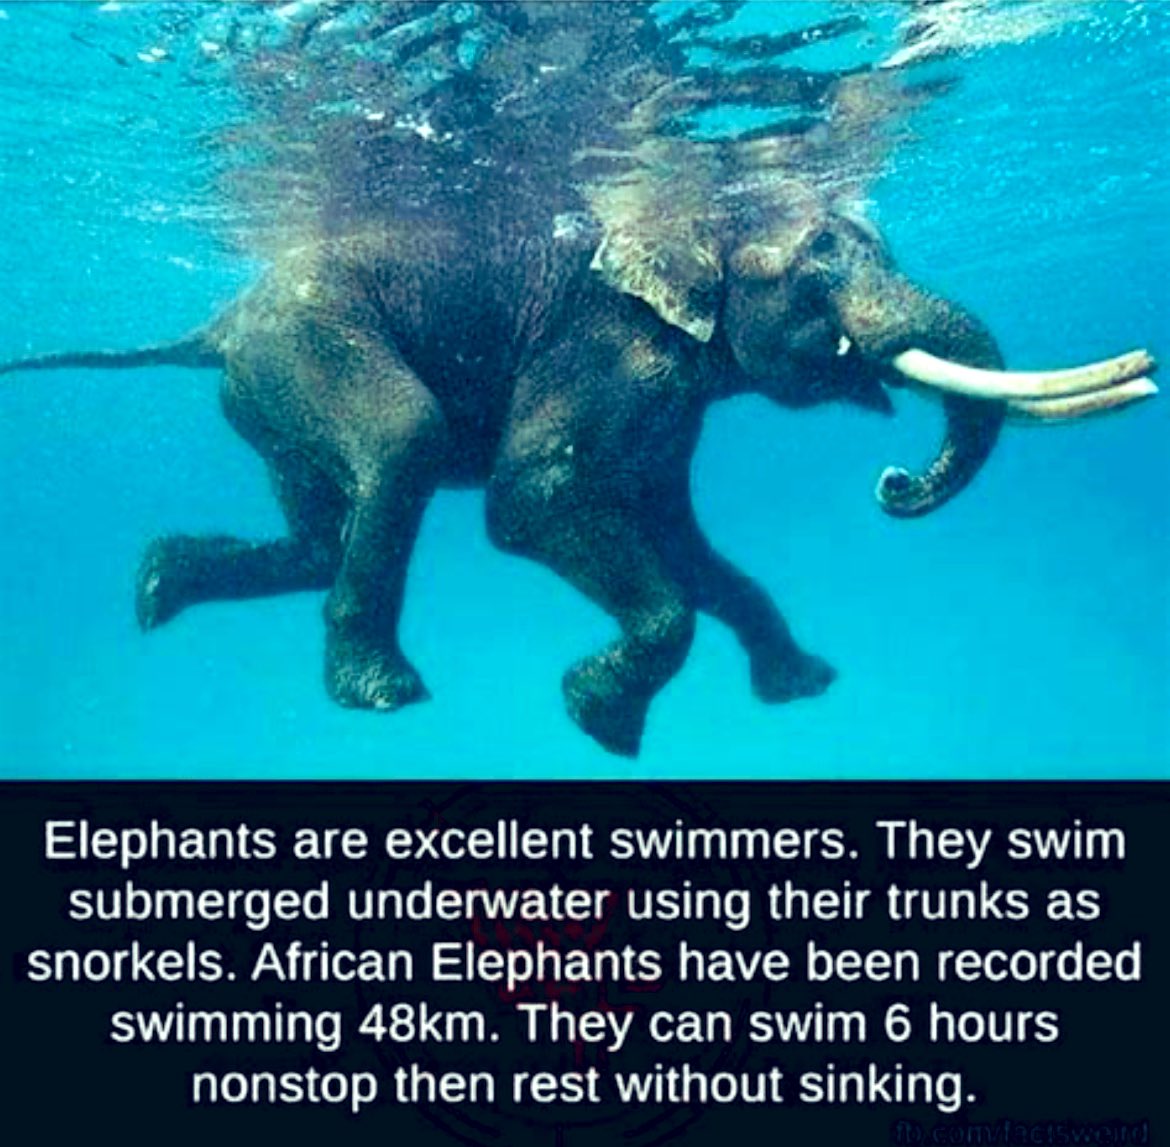 @EndWokeness 🐘 Elephants Make Better Swimmers!

Isn’t that right @ProudElephantUS?

💥 King of the Jungle, We Never Forget RINOs Who Dress Up as Elephants.

🌵Sink or swim, time to #RecallKatieHobbs because she installed Biden and kept the Border open to boost Democrat votes and facilitate